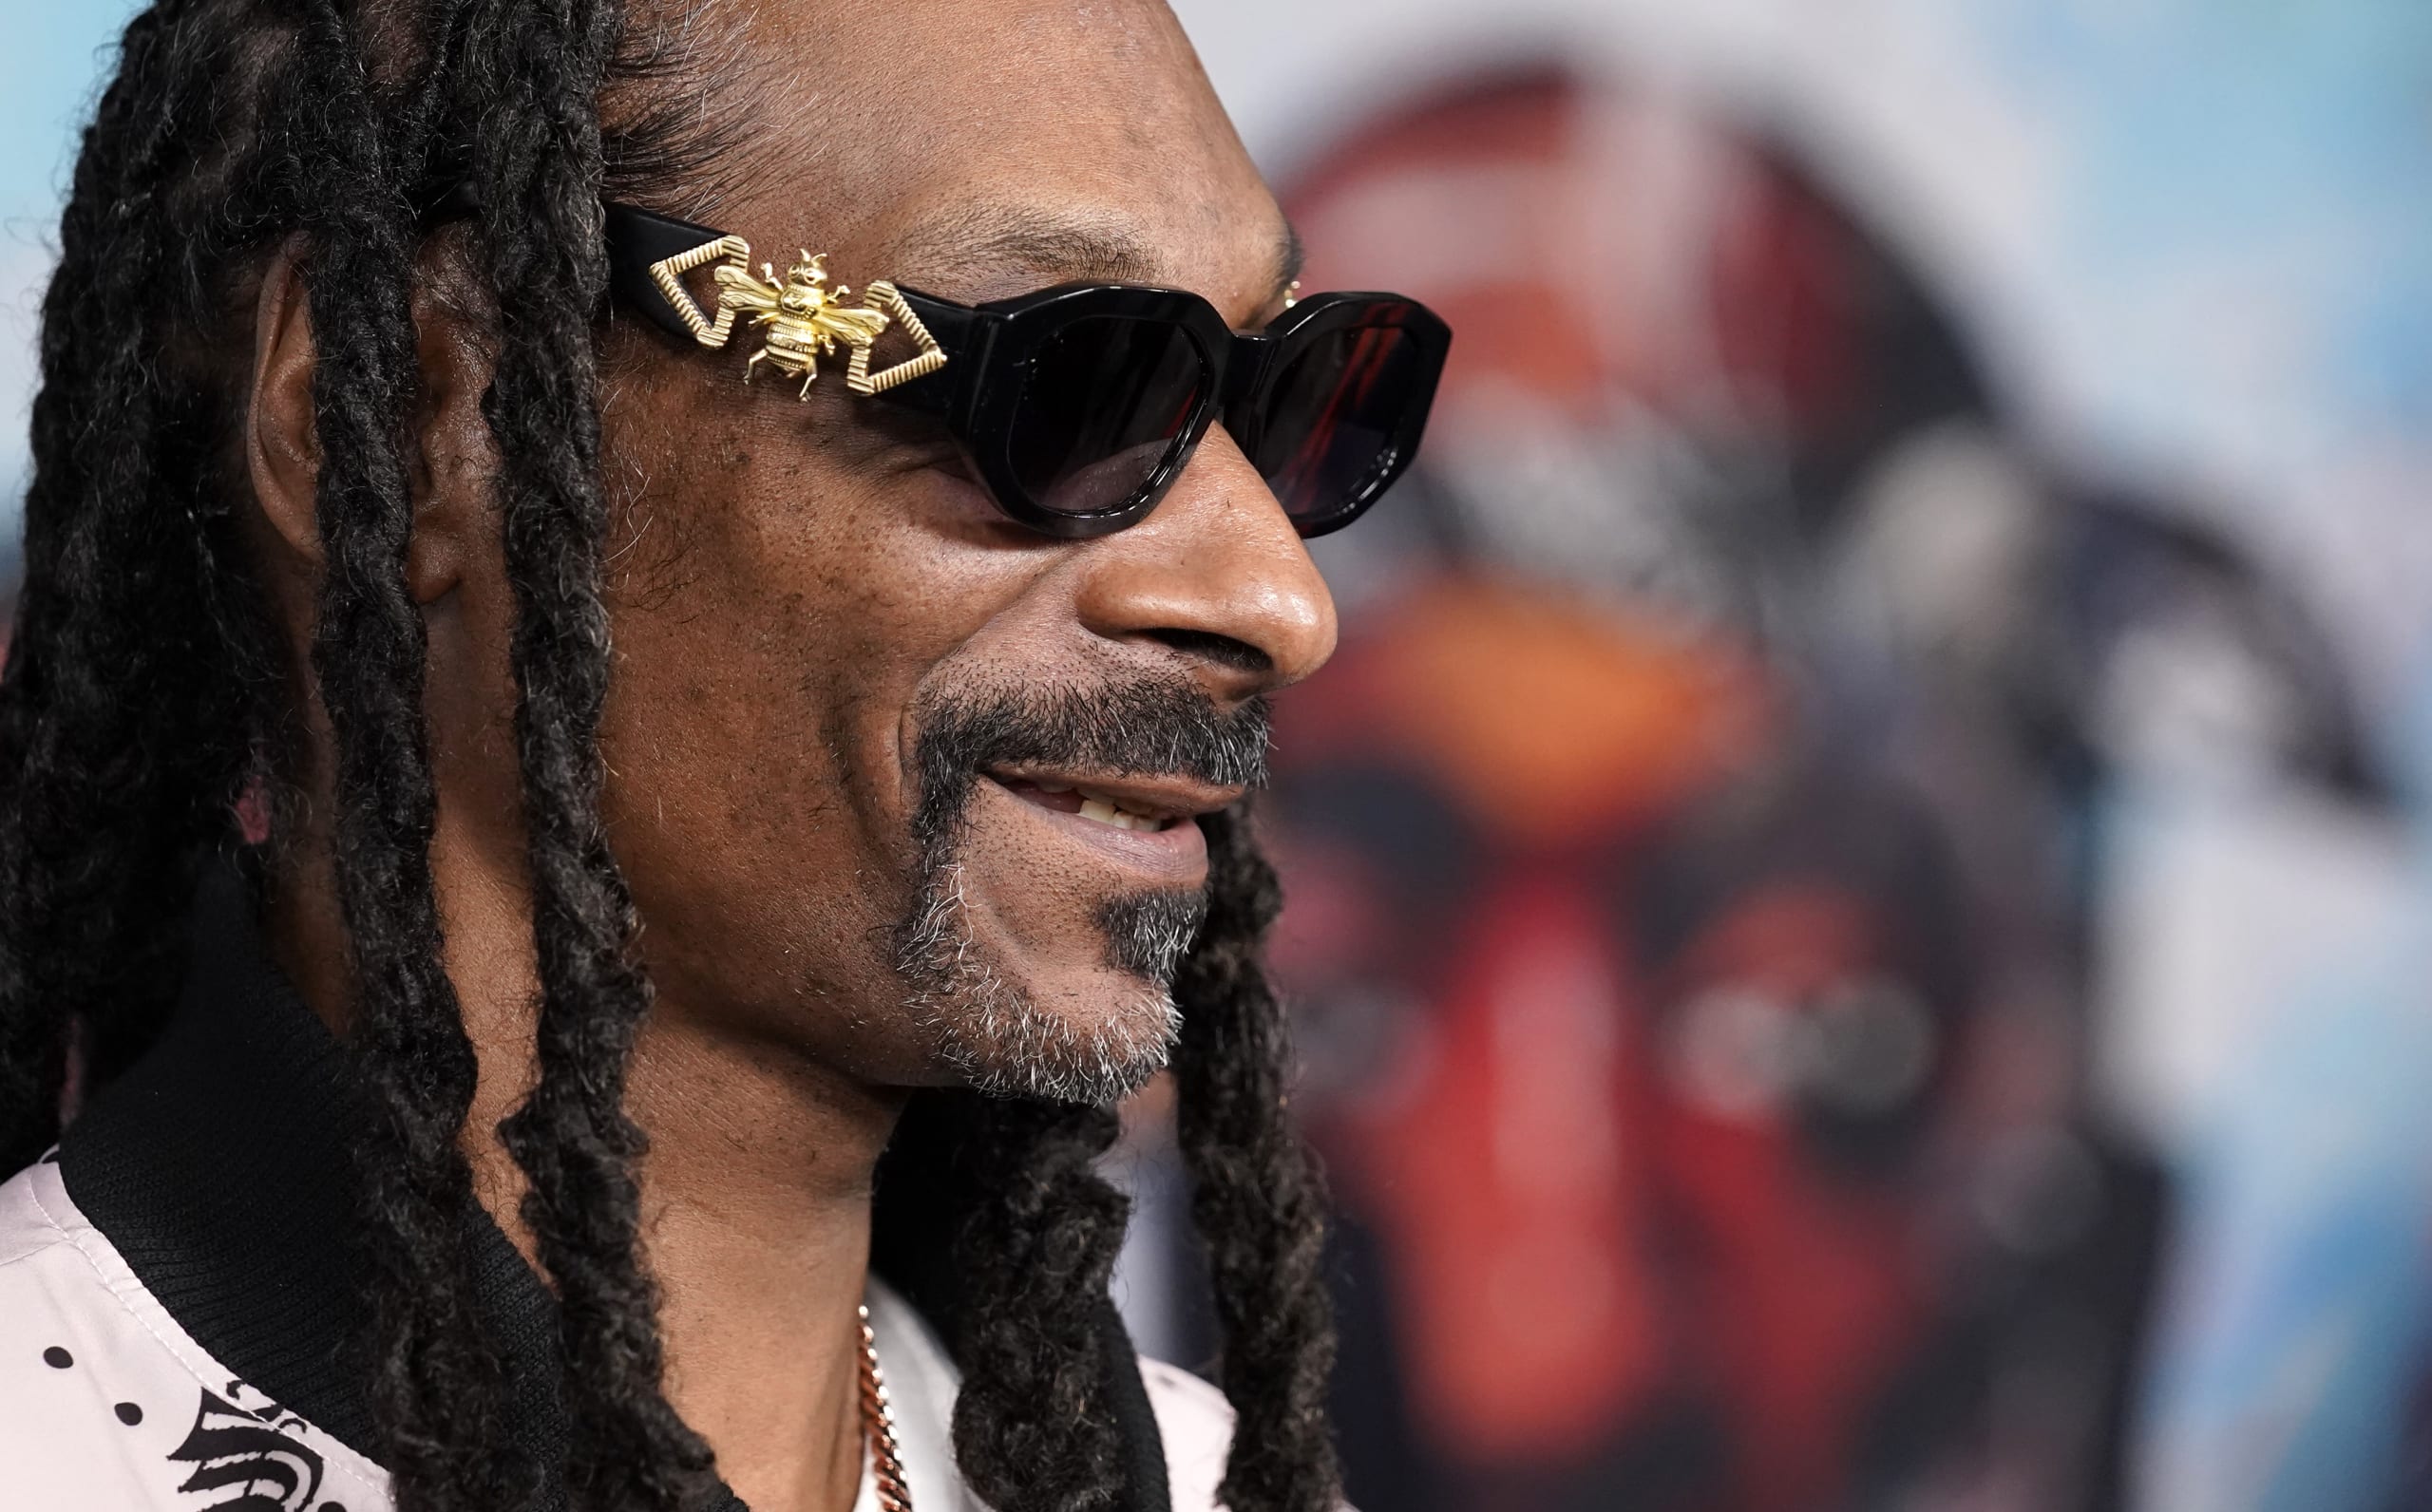 Snoop Dogg may want to be an owner of a hockey team